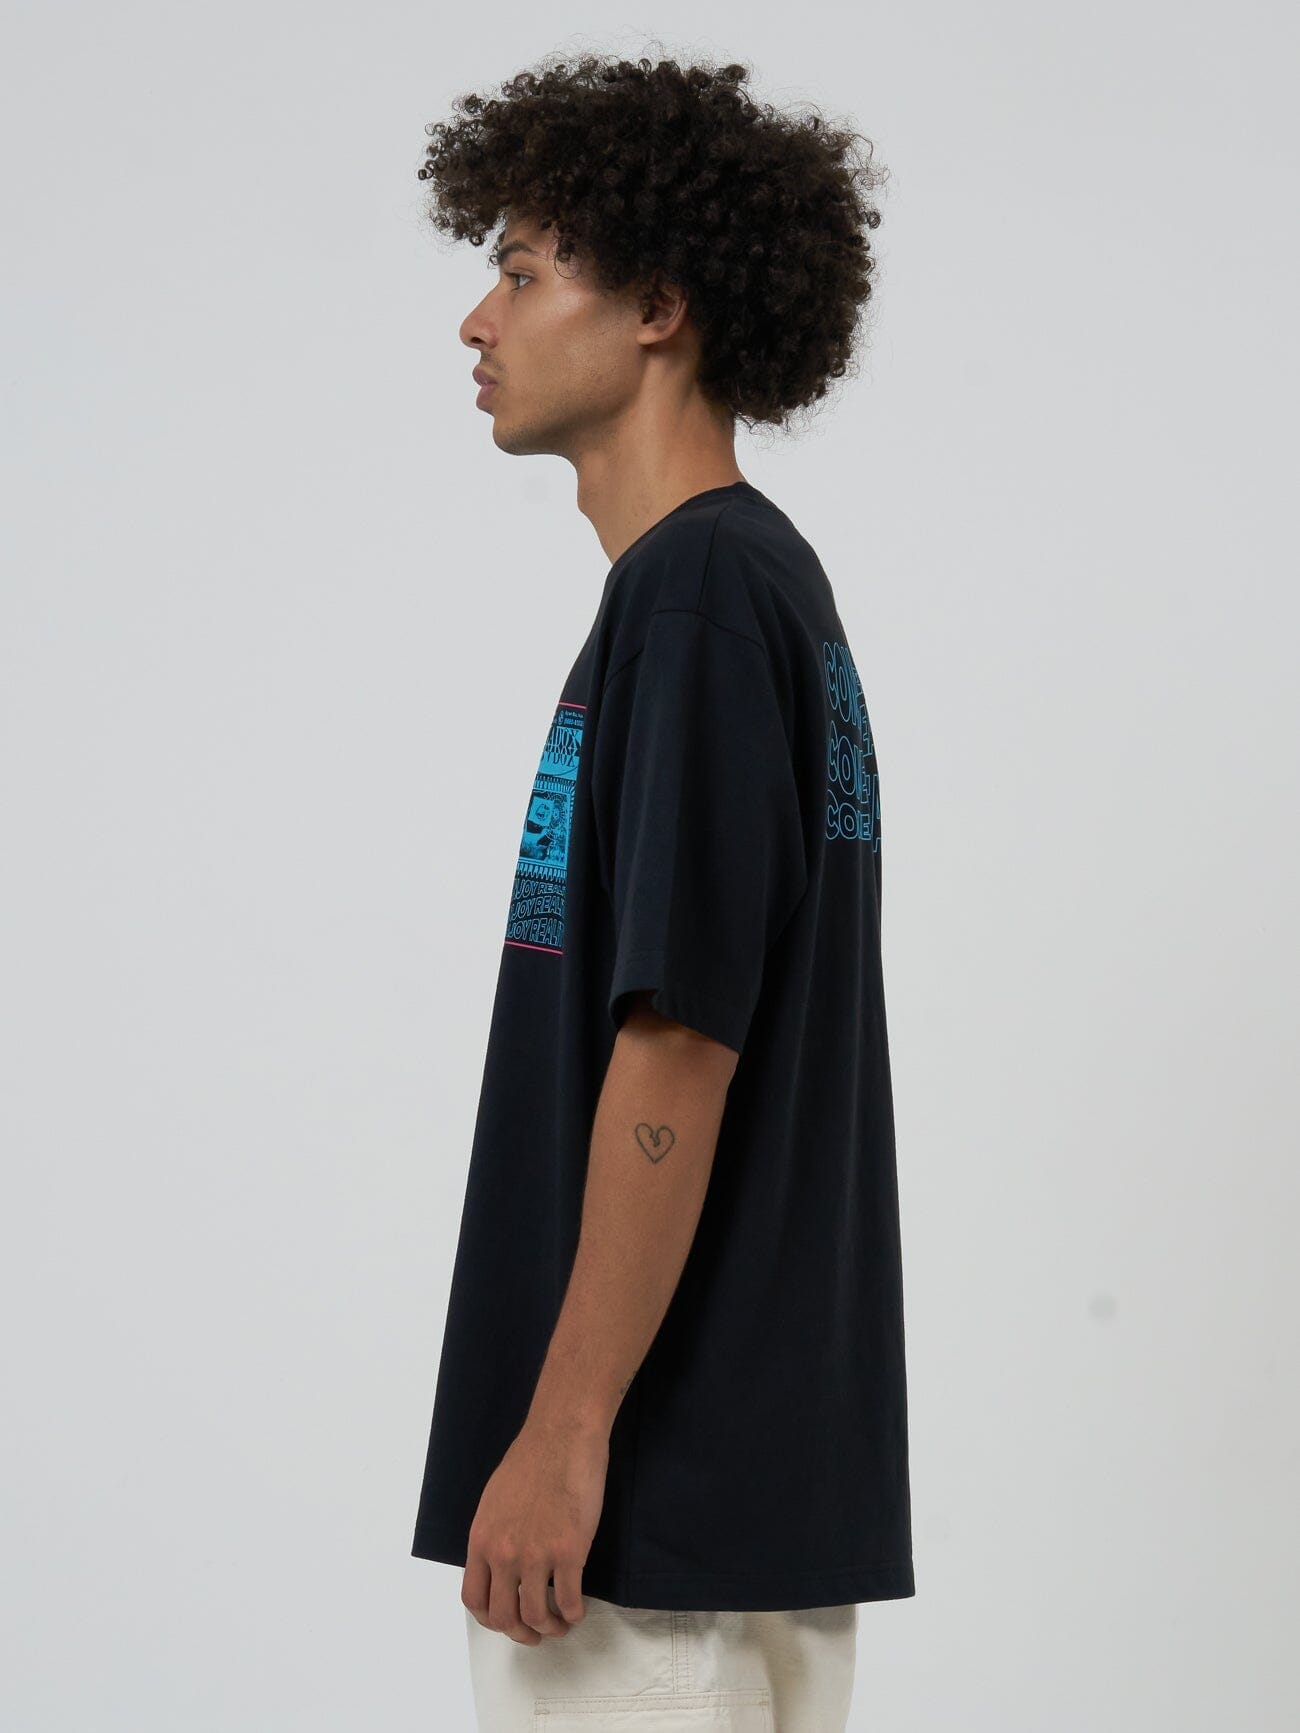 Paradox Reality Oversize Fit Tee - Black